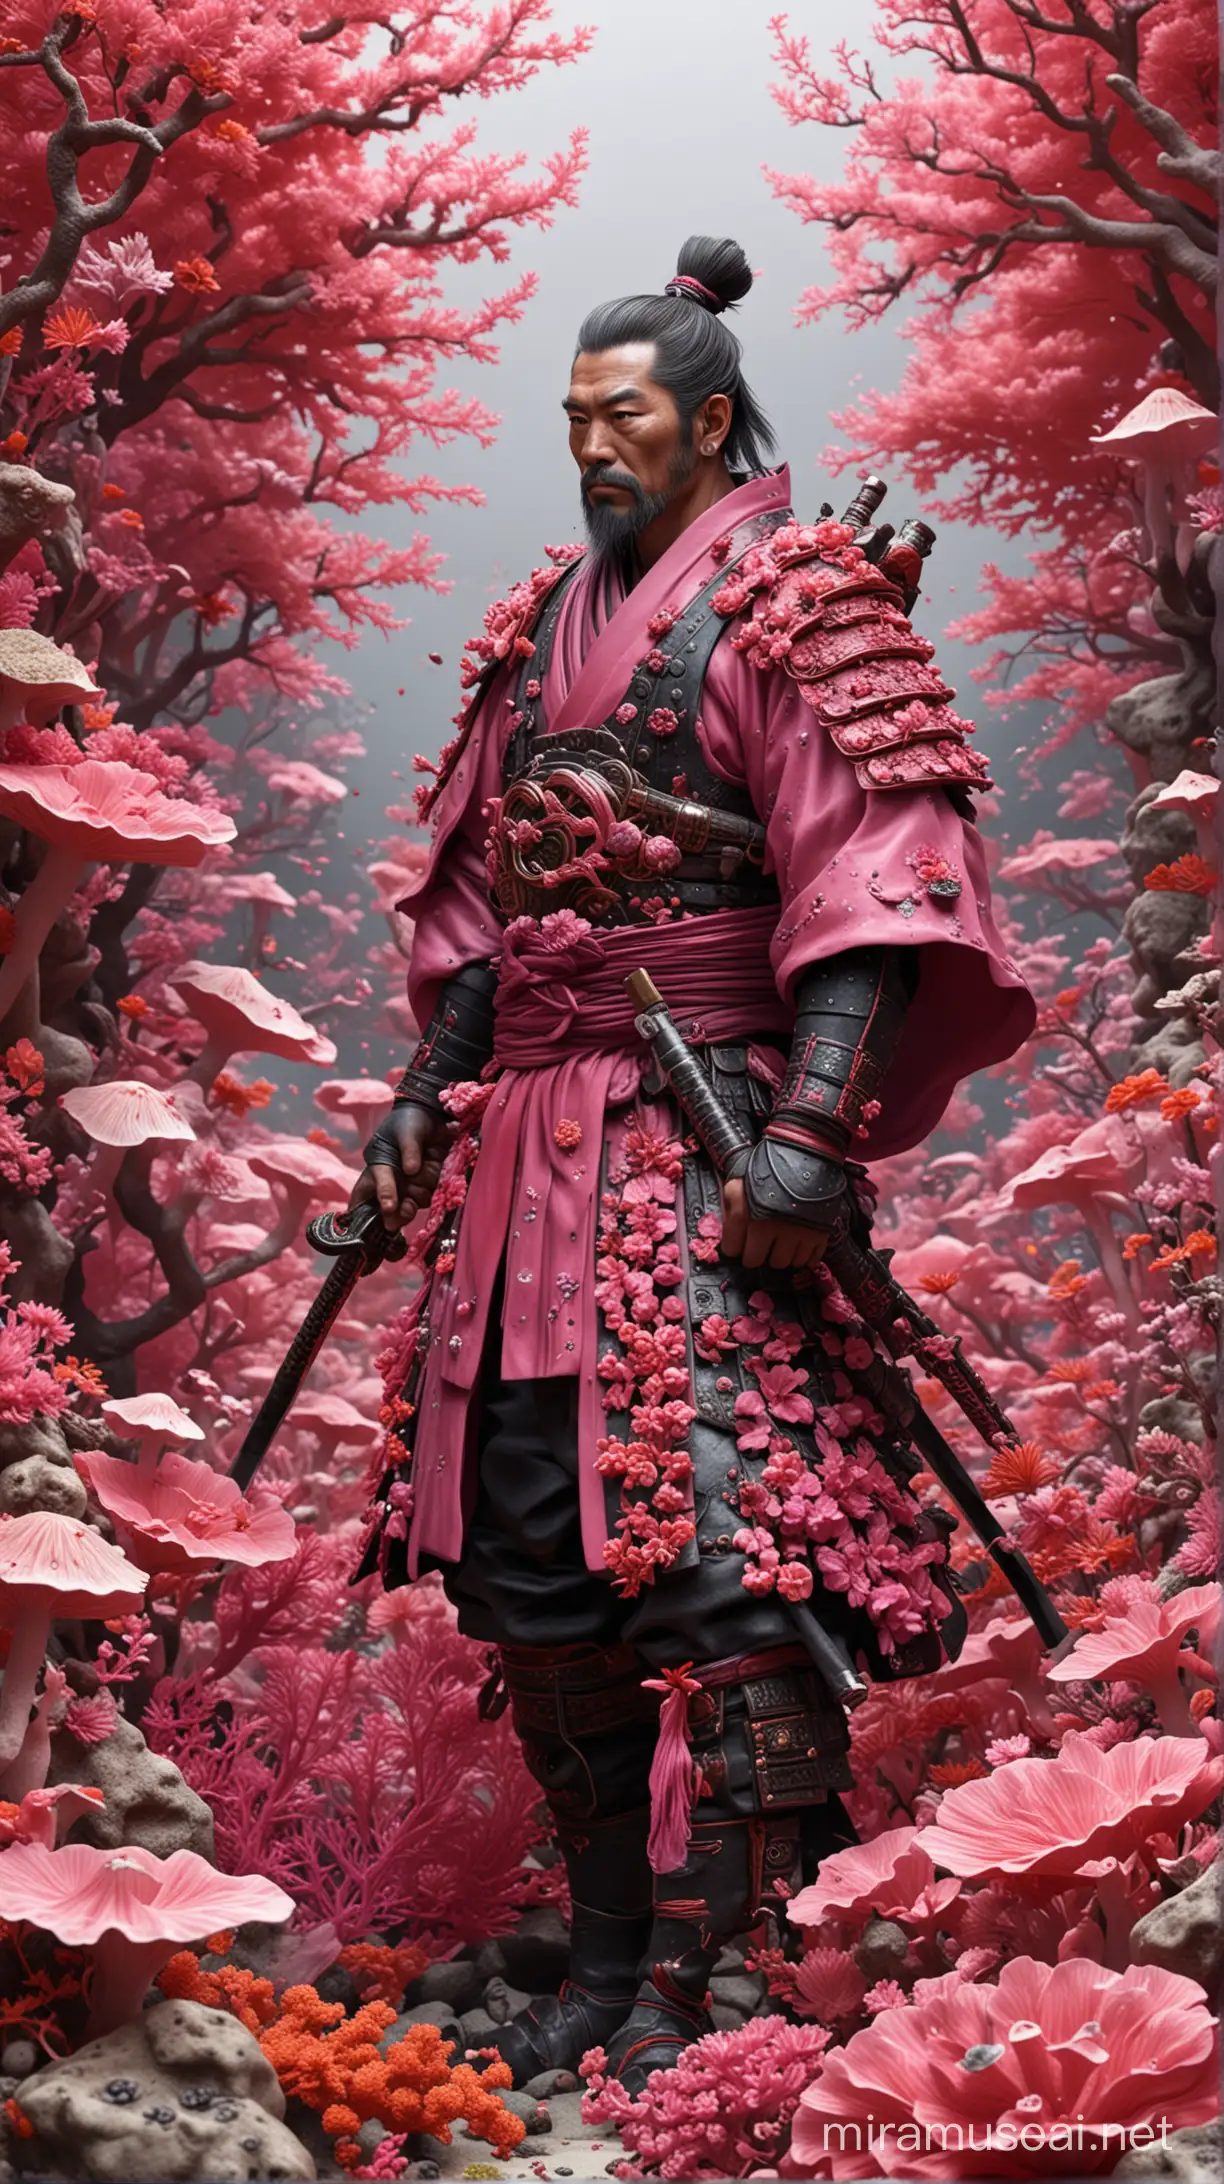 Hyper Realistic Samurai Covered in Colorful Pink Fluorescent Coral and Fungi